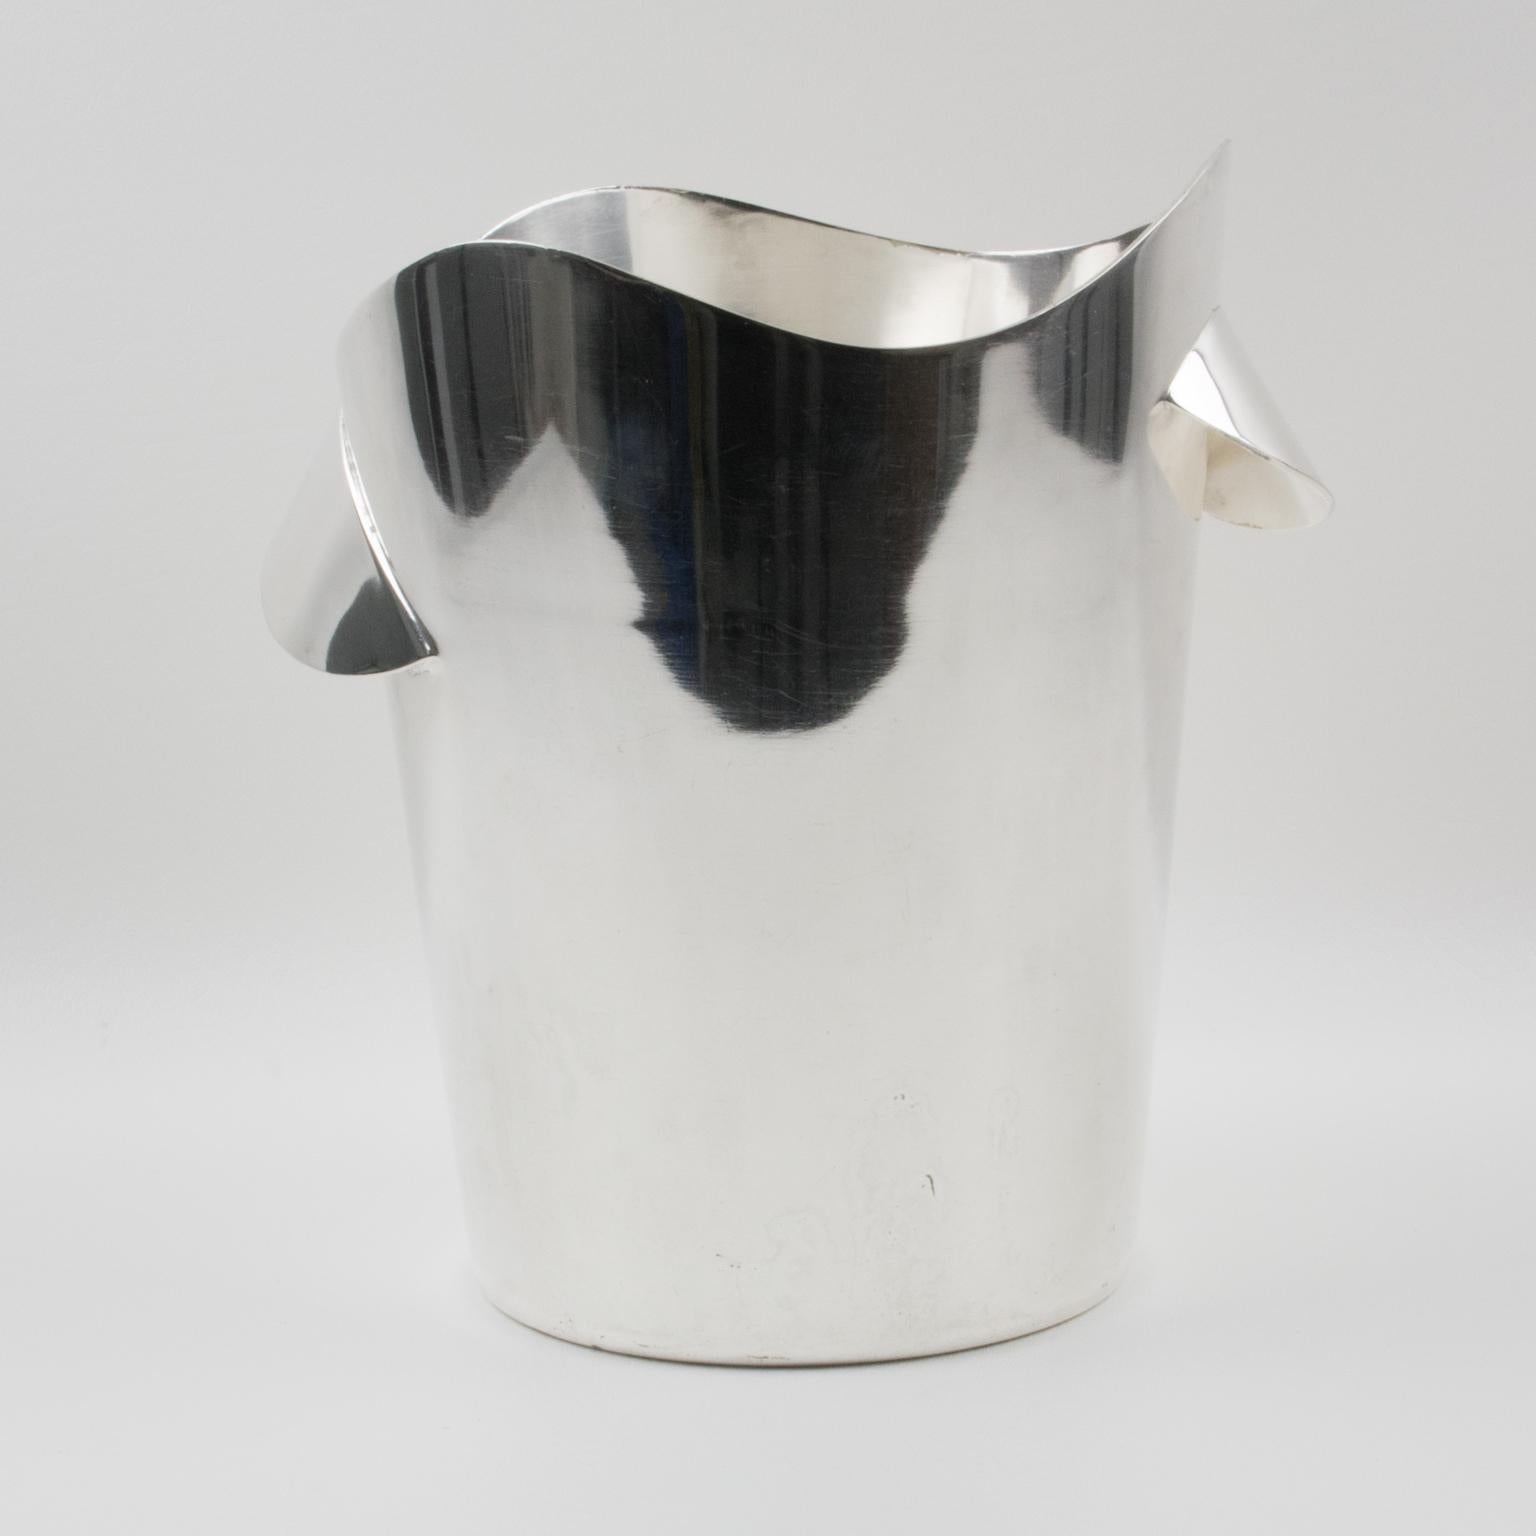 This Wiskemann modernist silver plate ice bucket or cooler is an exquisite piece of midcentury barware. Crafted by silversmith Wiskemann, Belgium, its elegant design features a trapezoidal structure and waved opening, providing a refined and